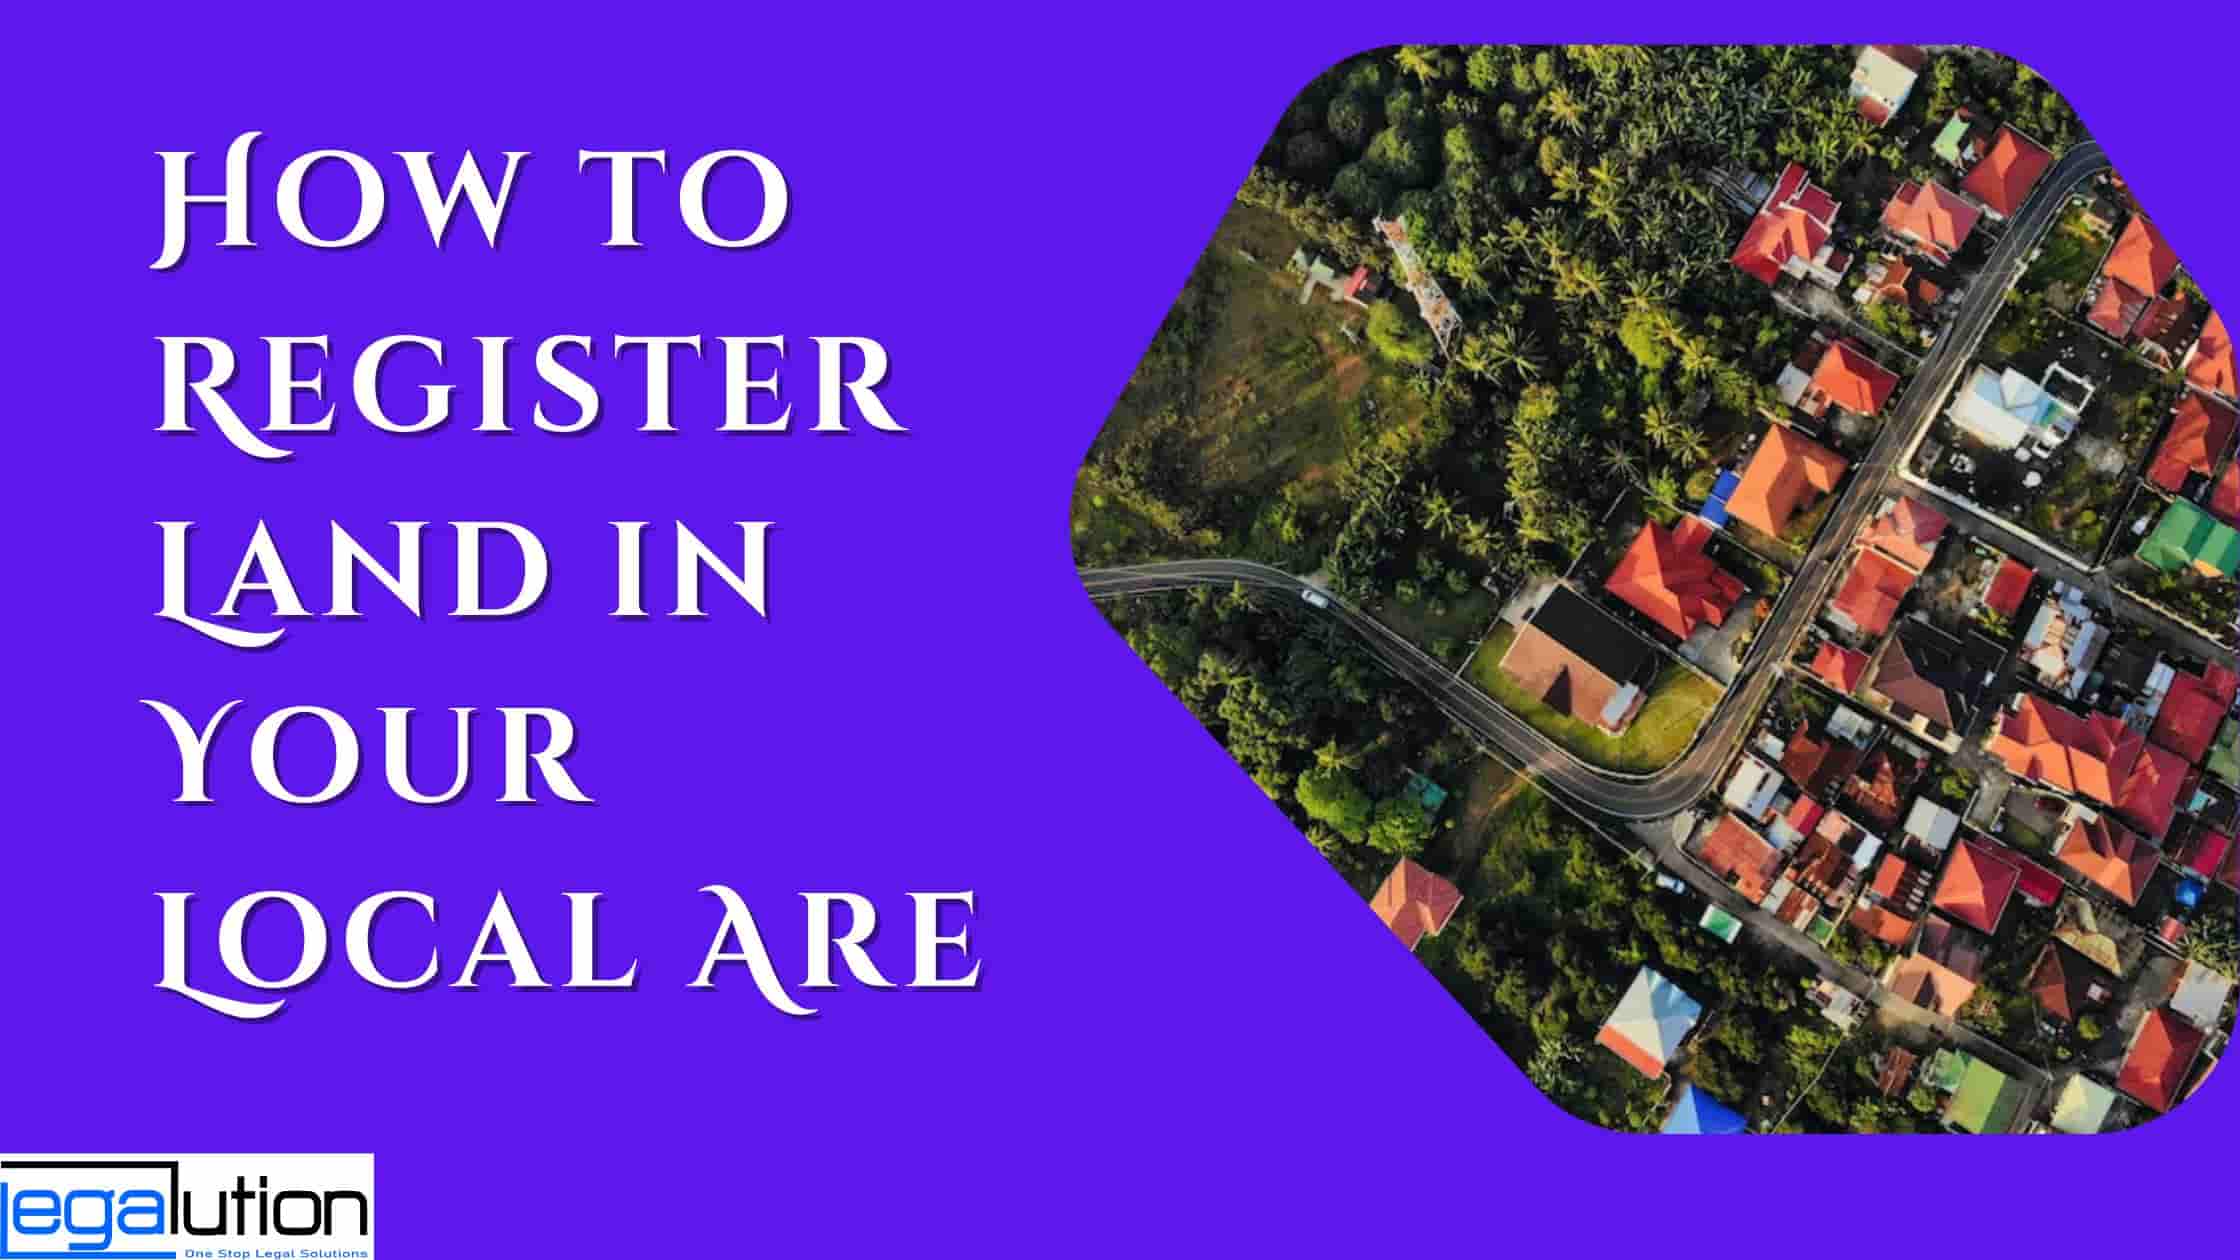 Procedure of How to Register Land in your Local Area